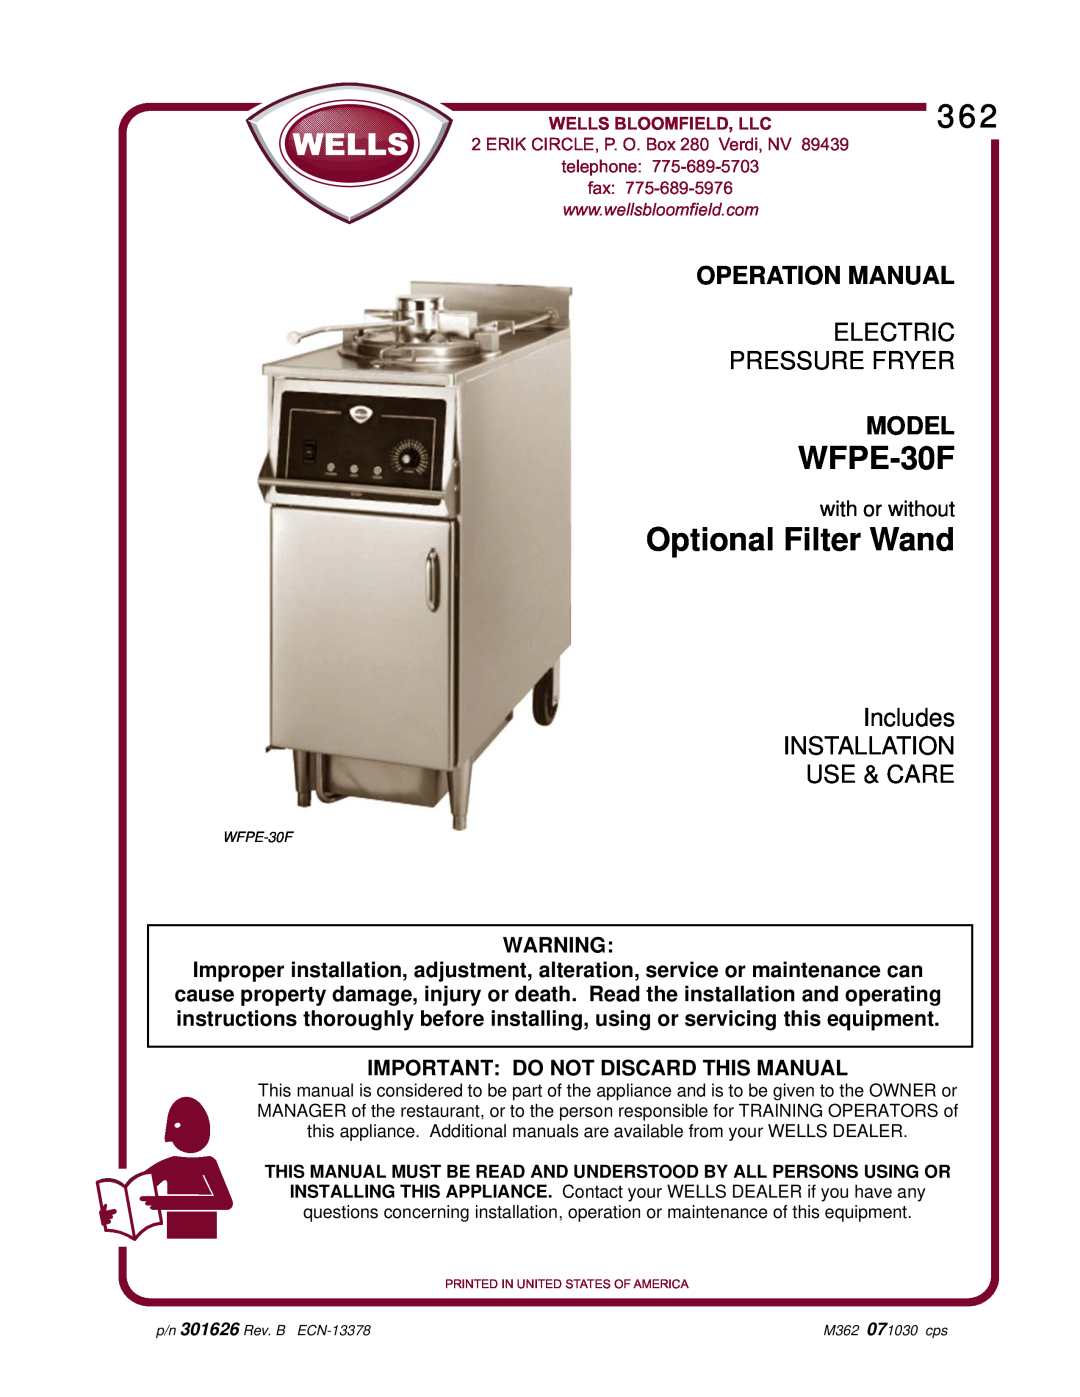 Wells WFPE-30F operation manual Important Do Not Discard This Manual, Wells Bloomfield, Llc, Optional Filter Wand, Model 